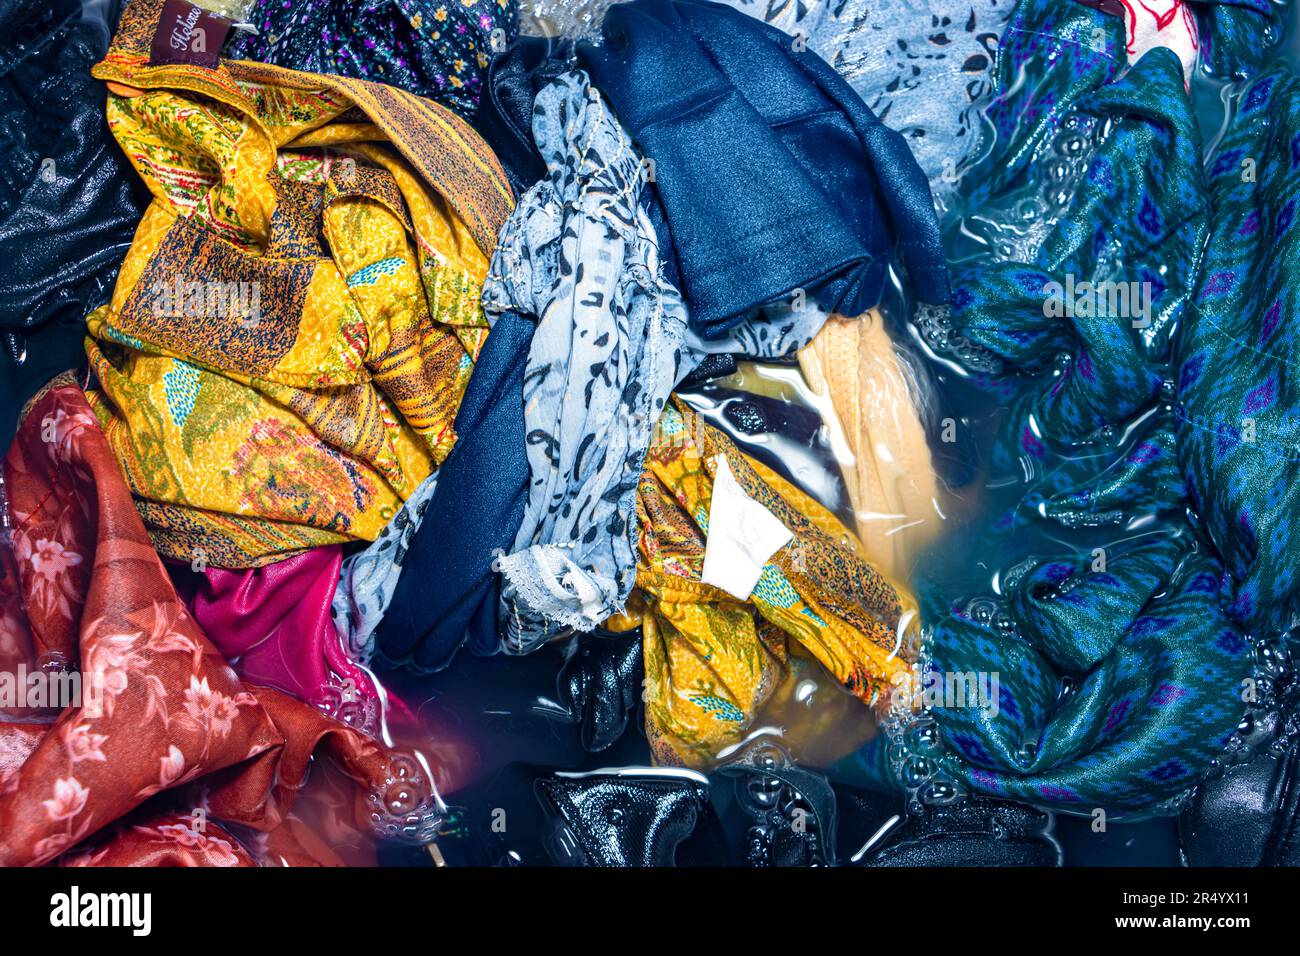 Laundry soaked in water is ready for washing procedure Stock Photo